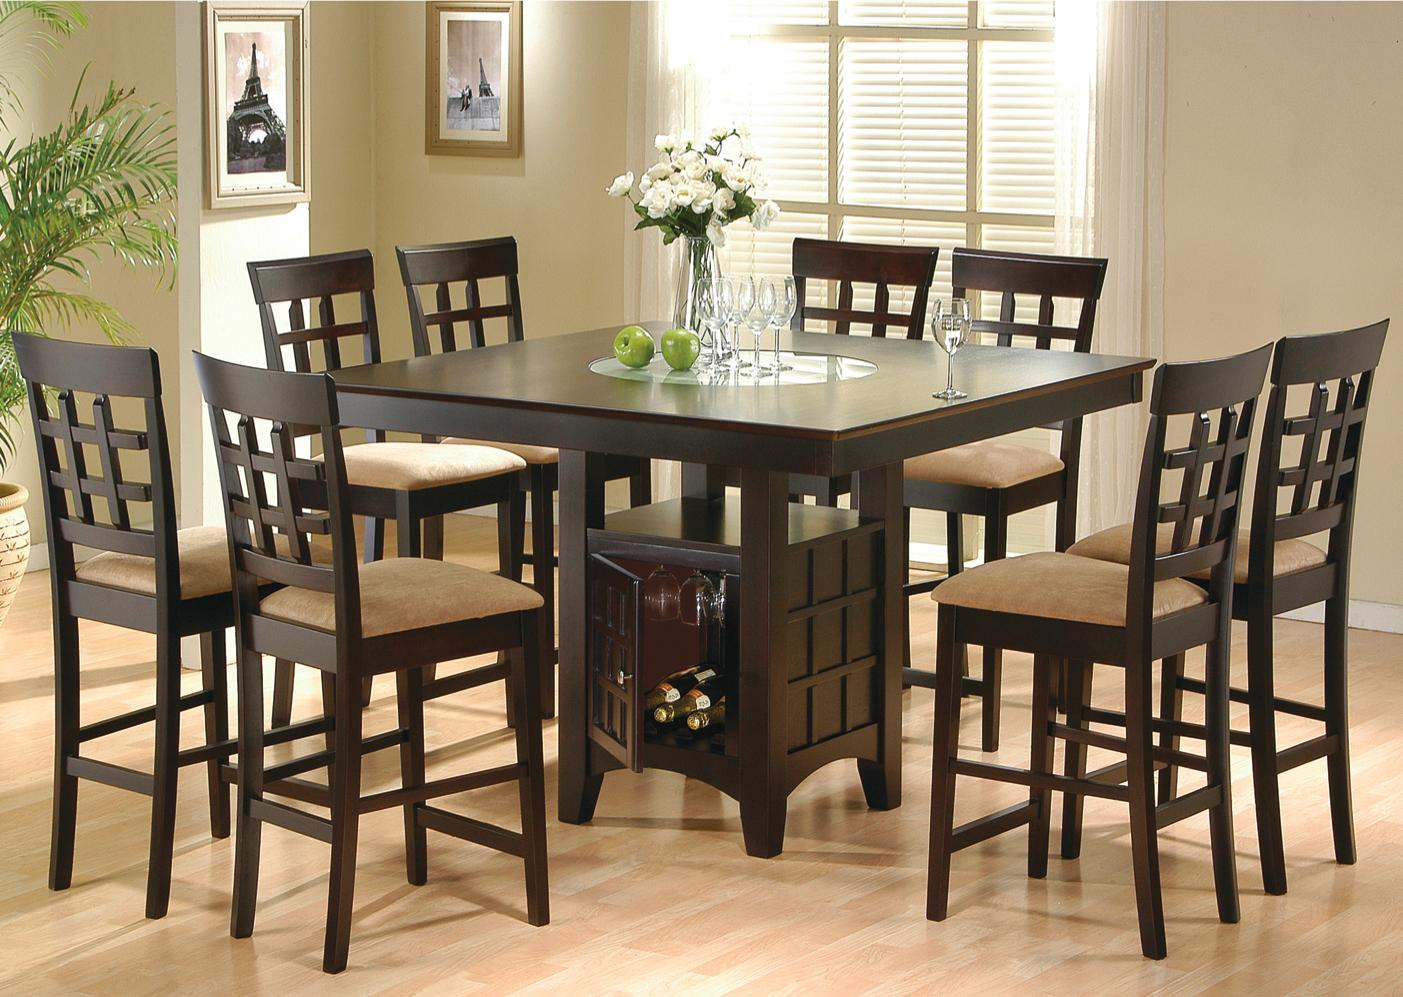 Dining Room Set With Matching Bar Stools